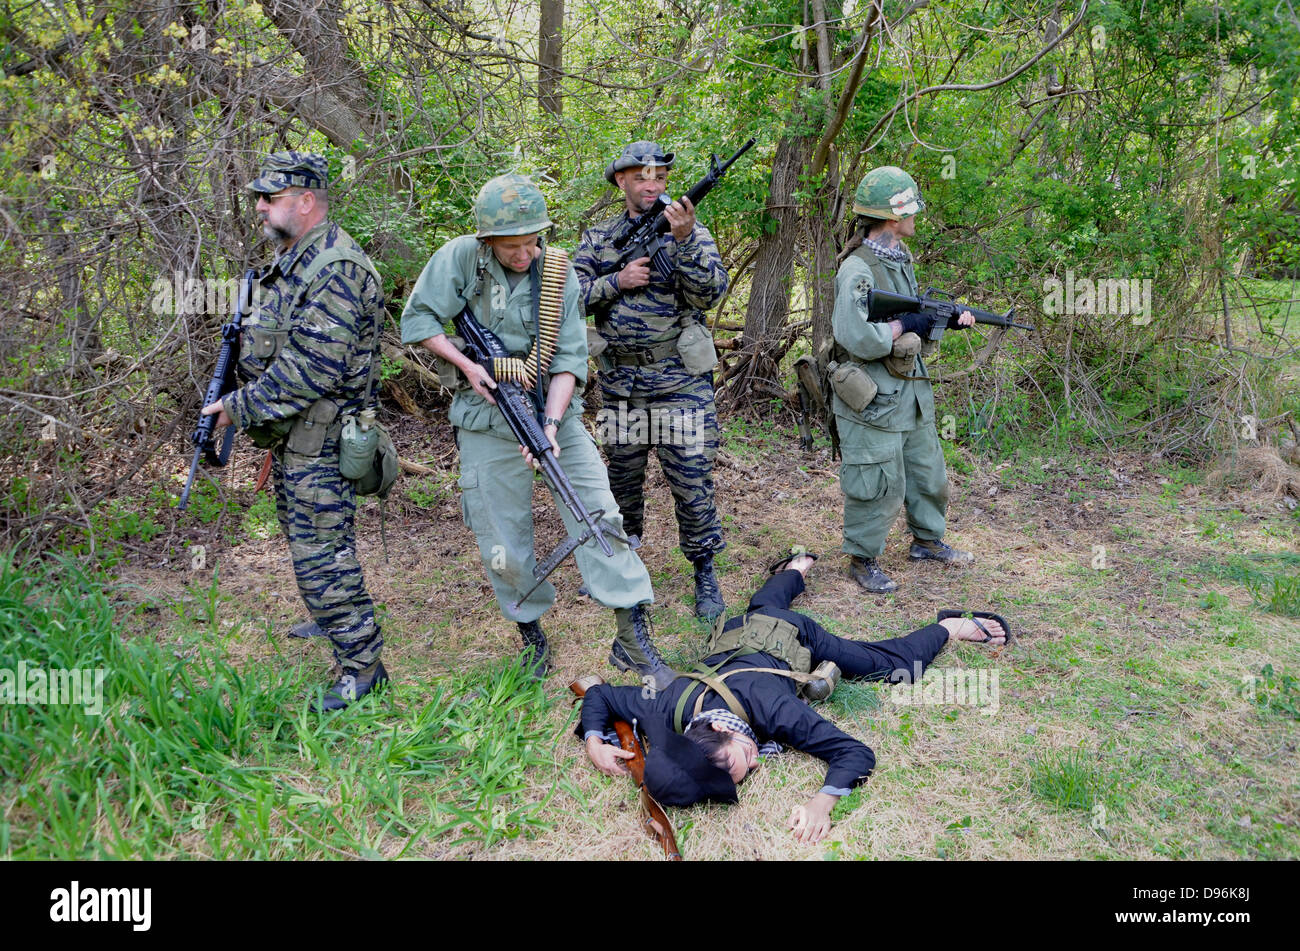 US soldiers stand over a dead Viet Cong soldier in a reenactment of the Vietnam War that was held in Glendale, Md Stock Photo